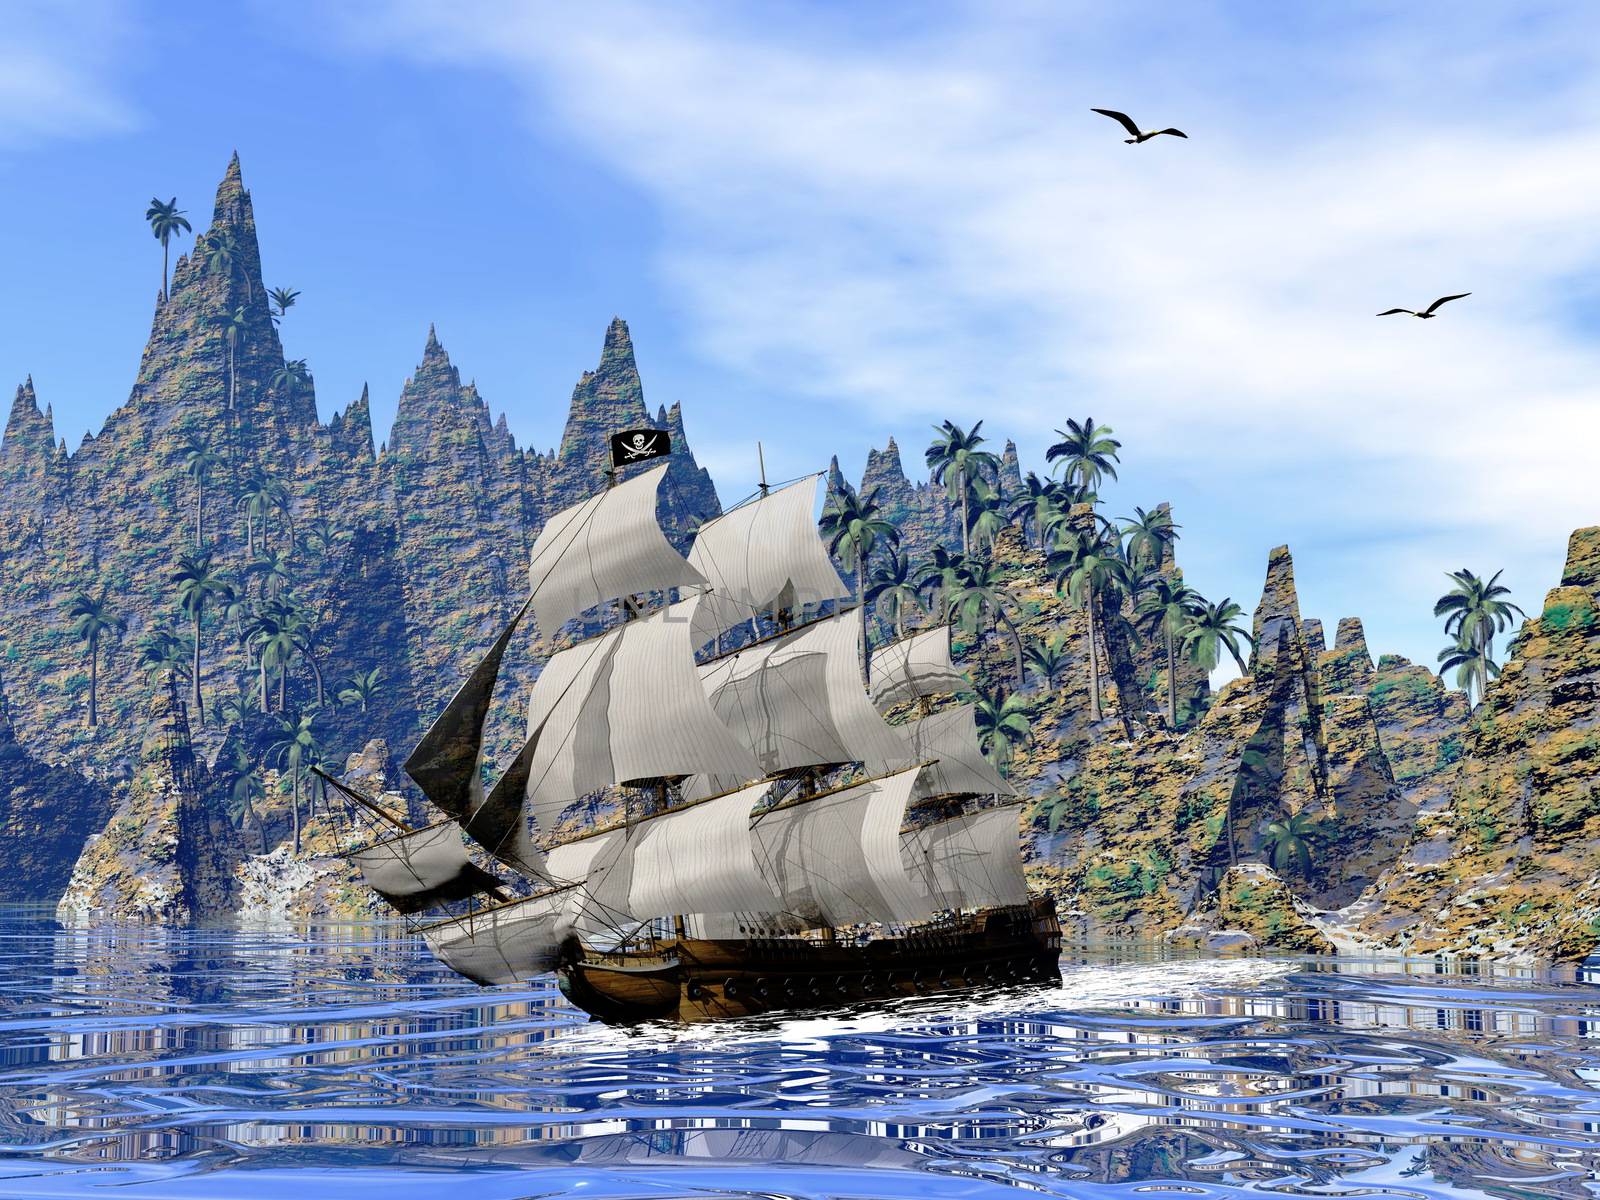 Pirate ship on the coast - 3D render by Elenaphotos21